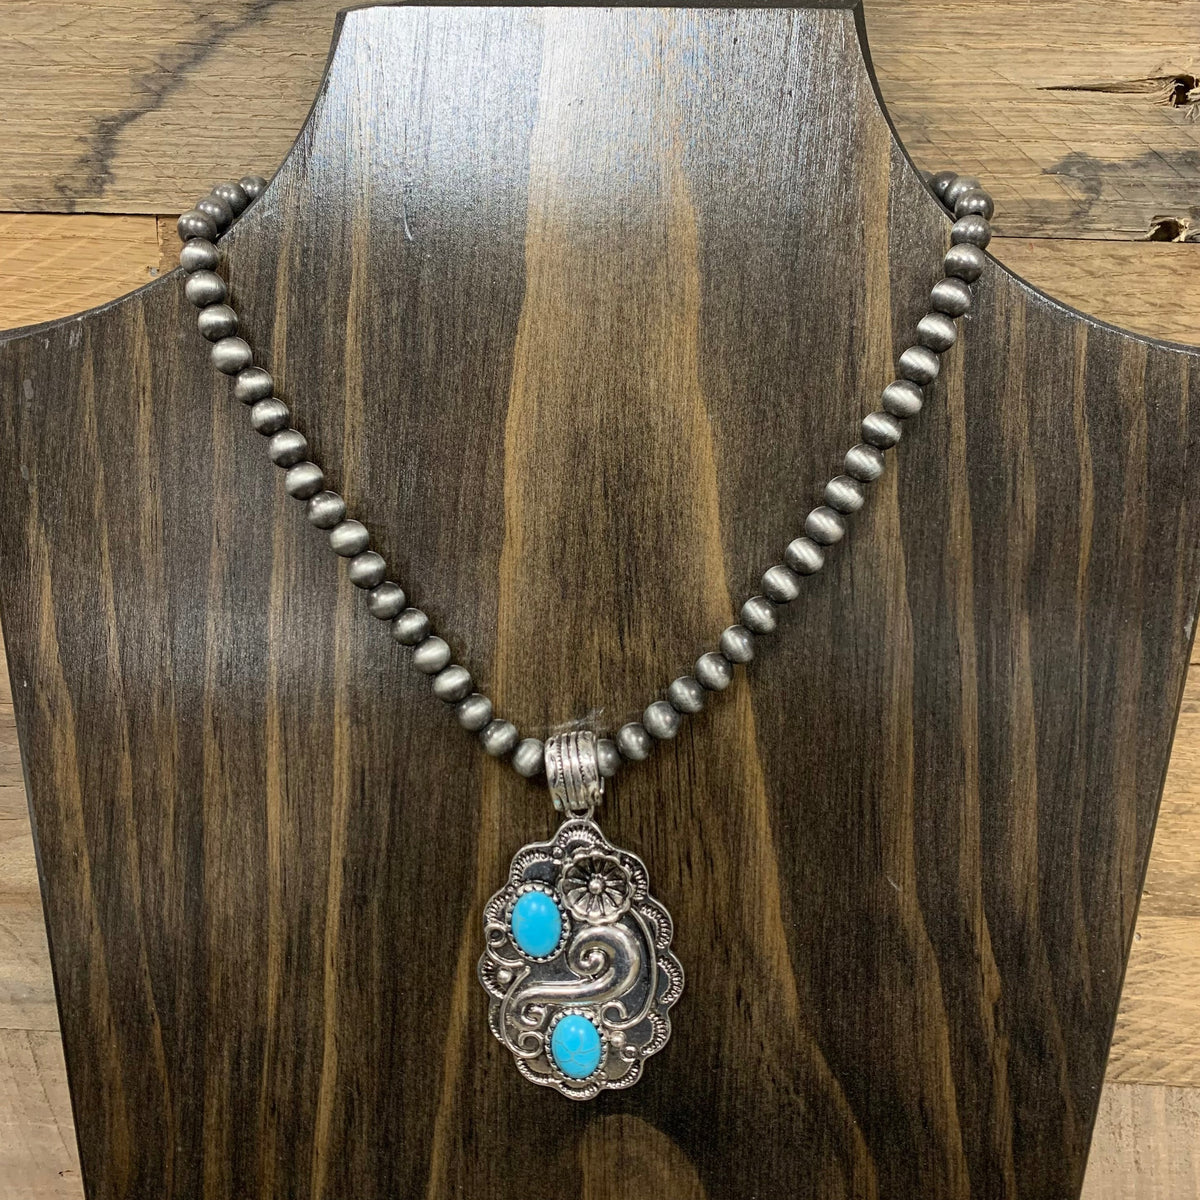 Western Sanderson Navajo Pearl and Turquoise Silver Tone Necklace